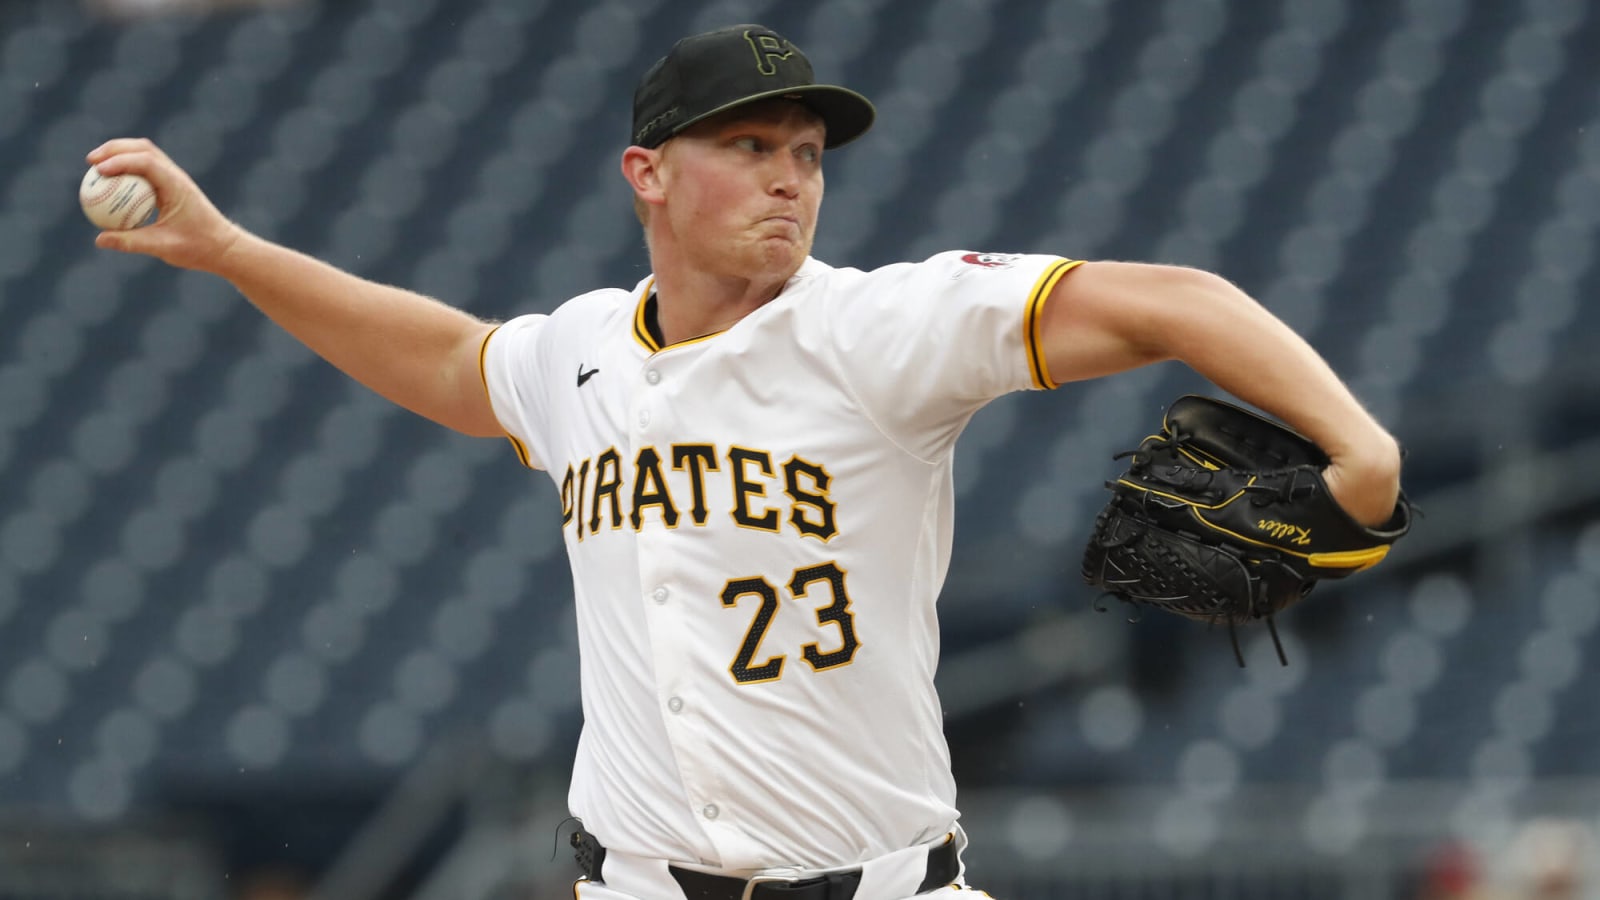 Keller’s Complete Game, Olivares’ Grand Slam Lead Pirates to Win Over Angels